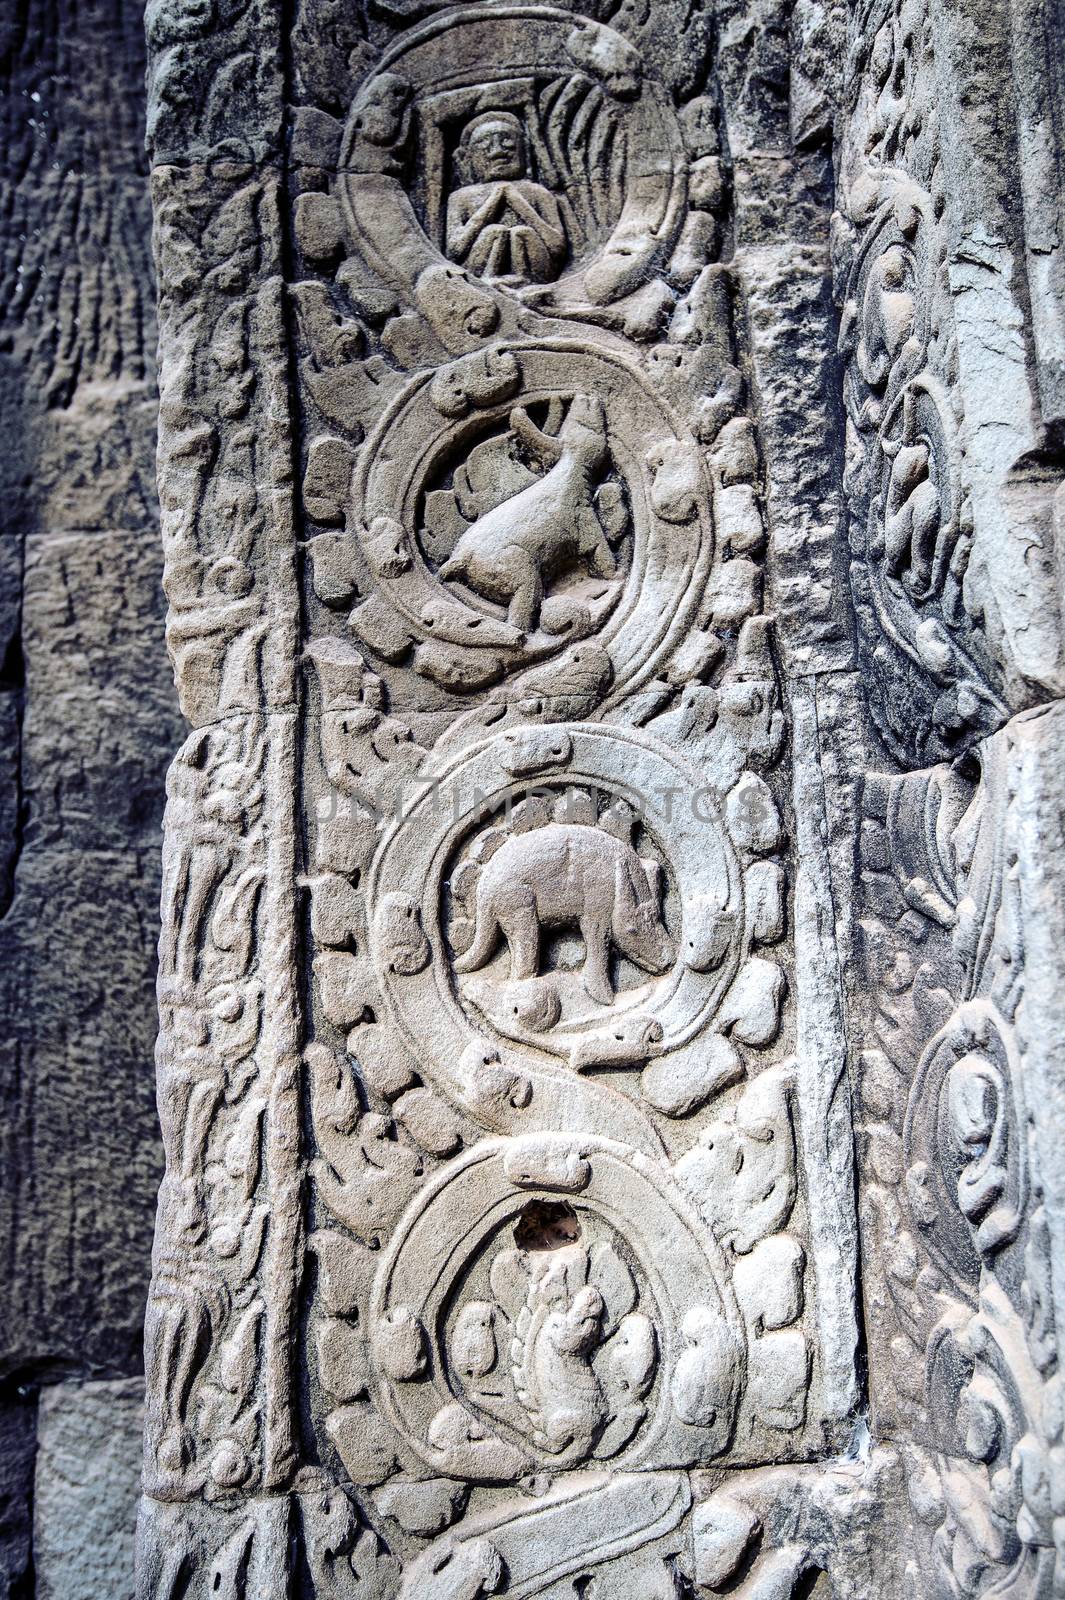 sculpted stone depicting a dinosaur at the ancient Ta Prohm temple at Angkor Wat, Siem Reap, Cambodia. by gutarphotoghaphy